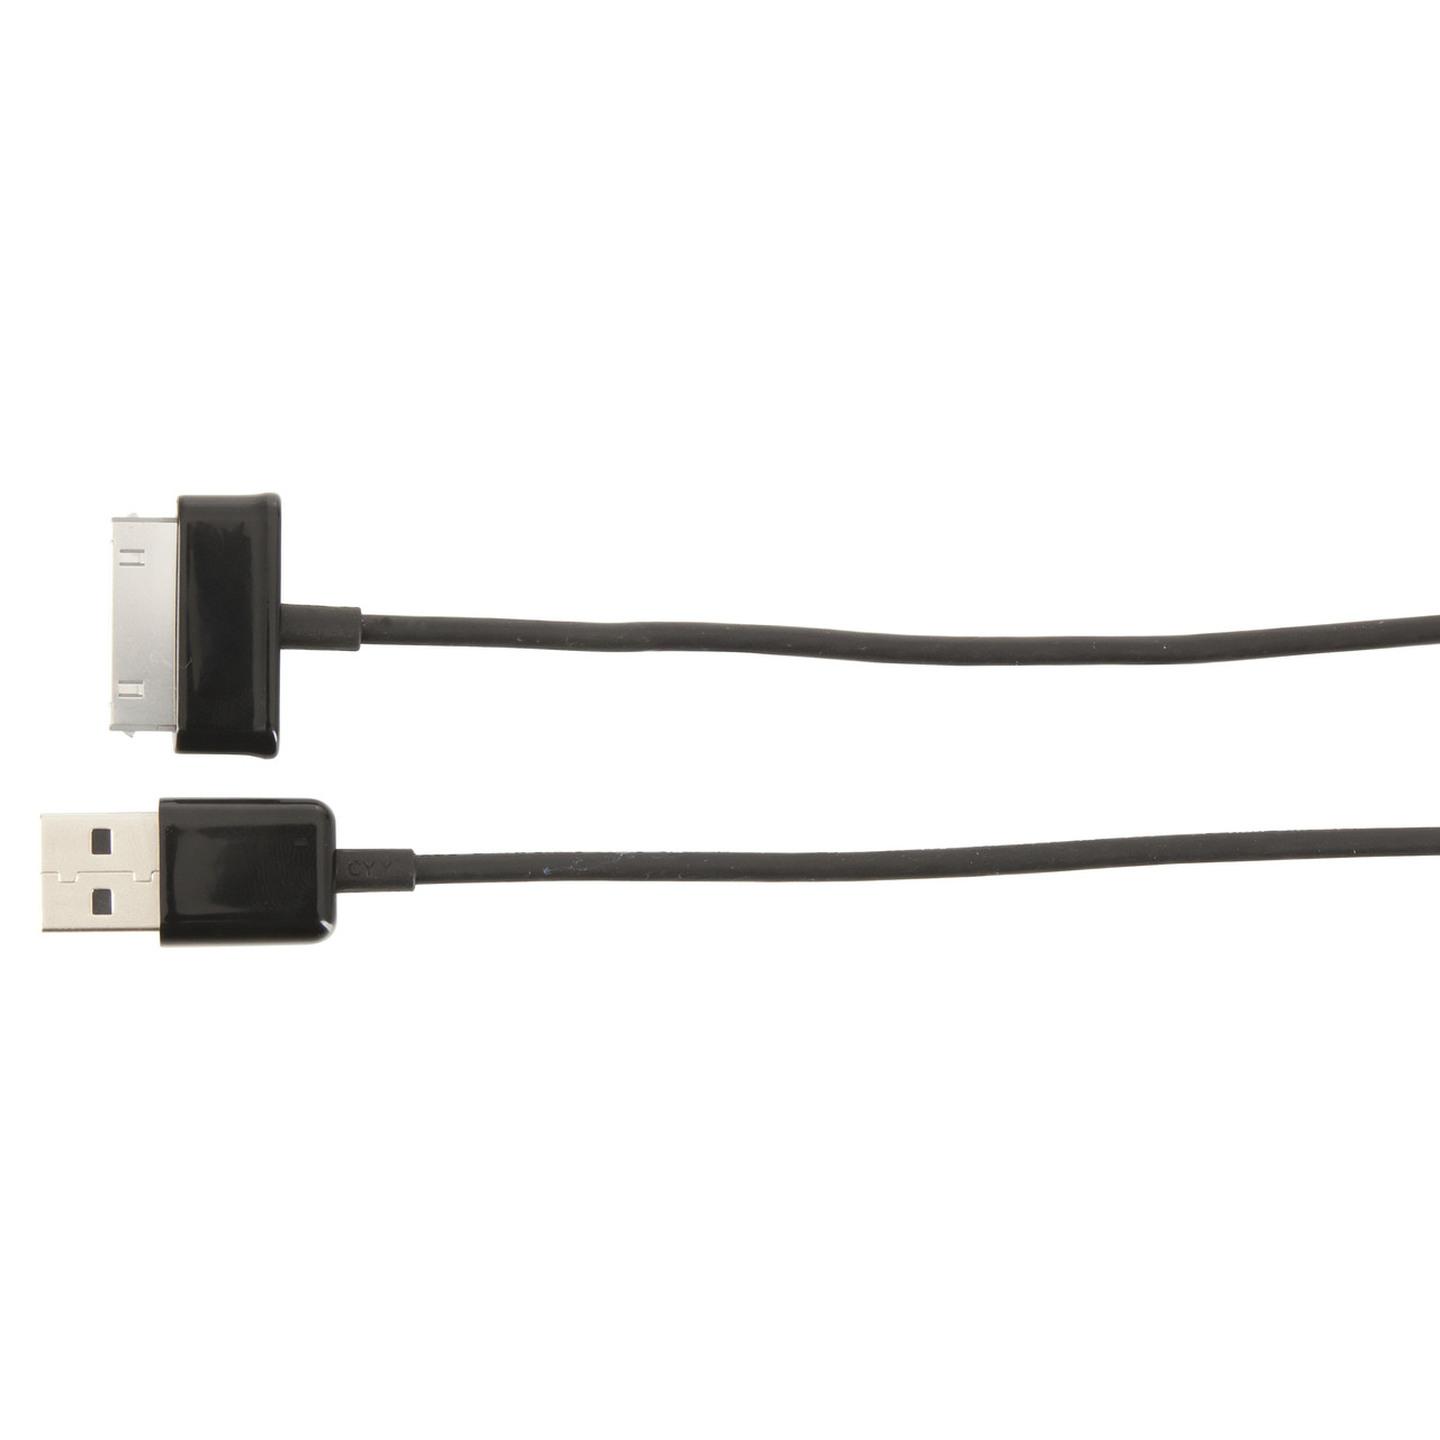 Sync/Charge Cable for Samsung Galaxy Tab - 1m